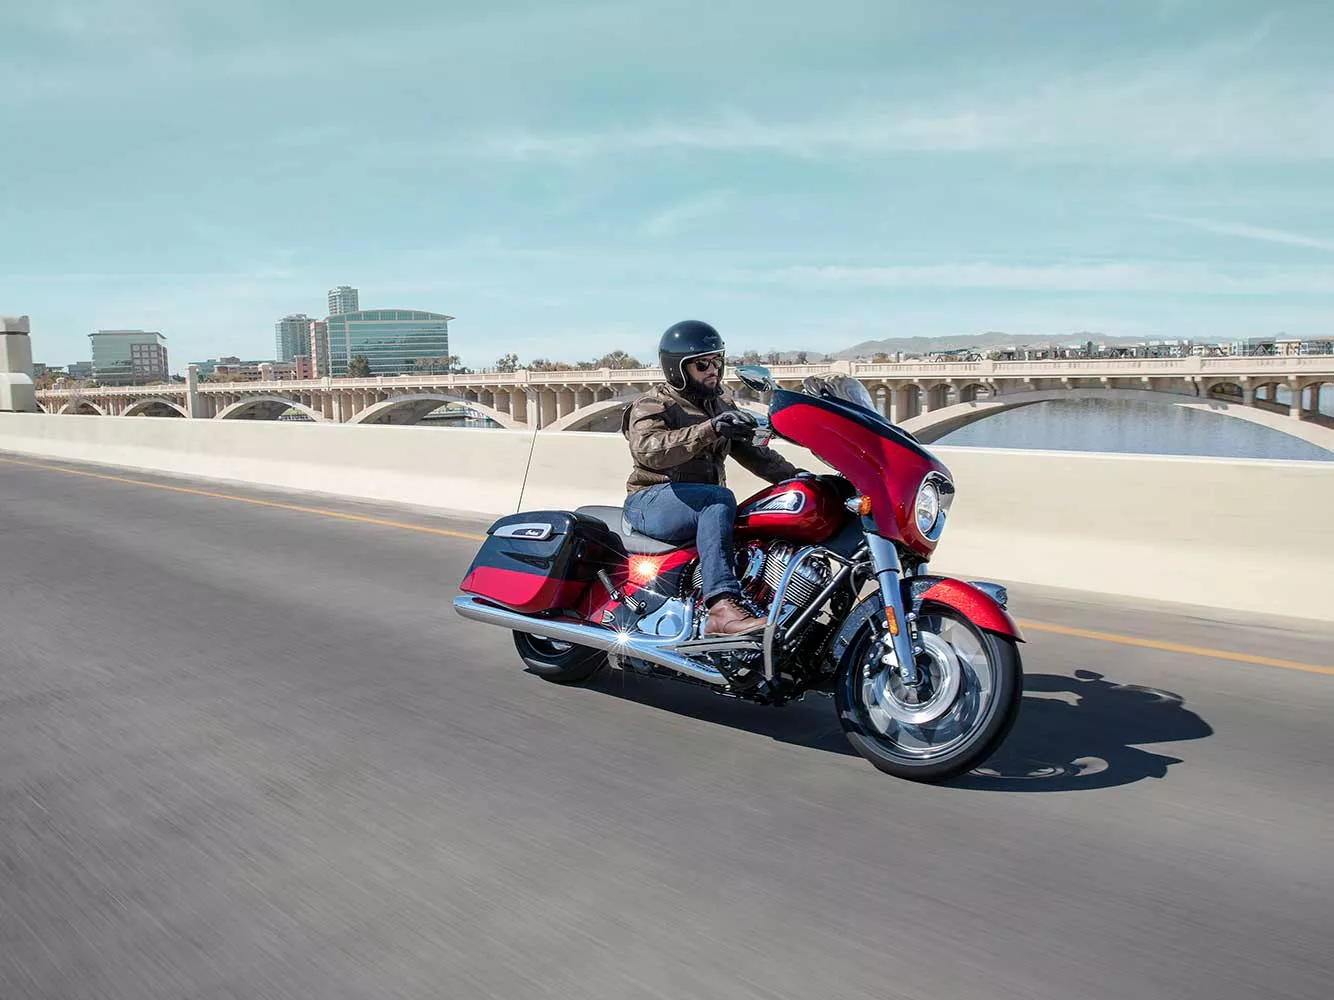 Redesigned in 2019 and updated for 2020, there are five Indian Chieftain models. Pictured is the Chieftain Elite. The Springfield lineup has two models.